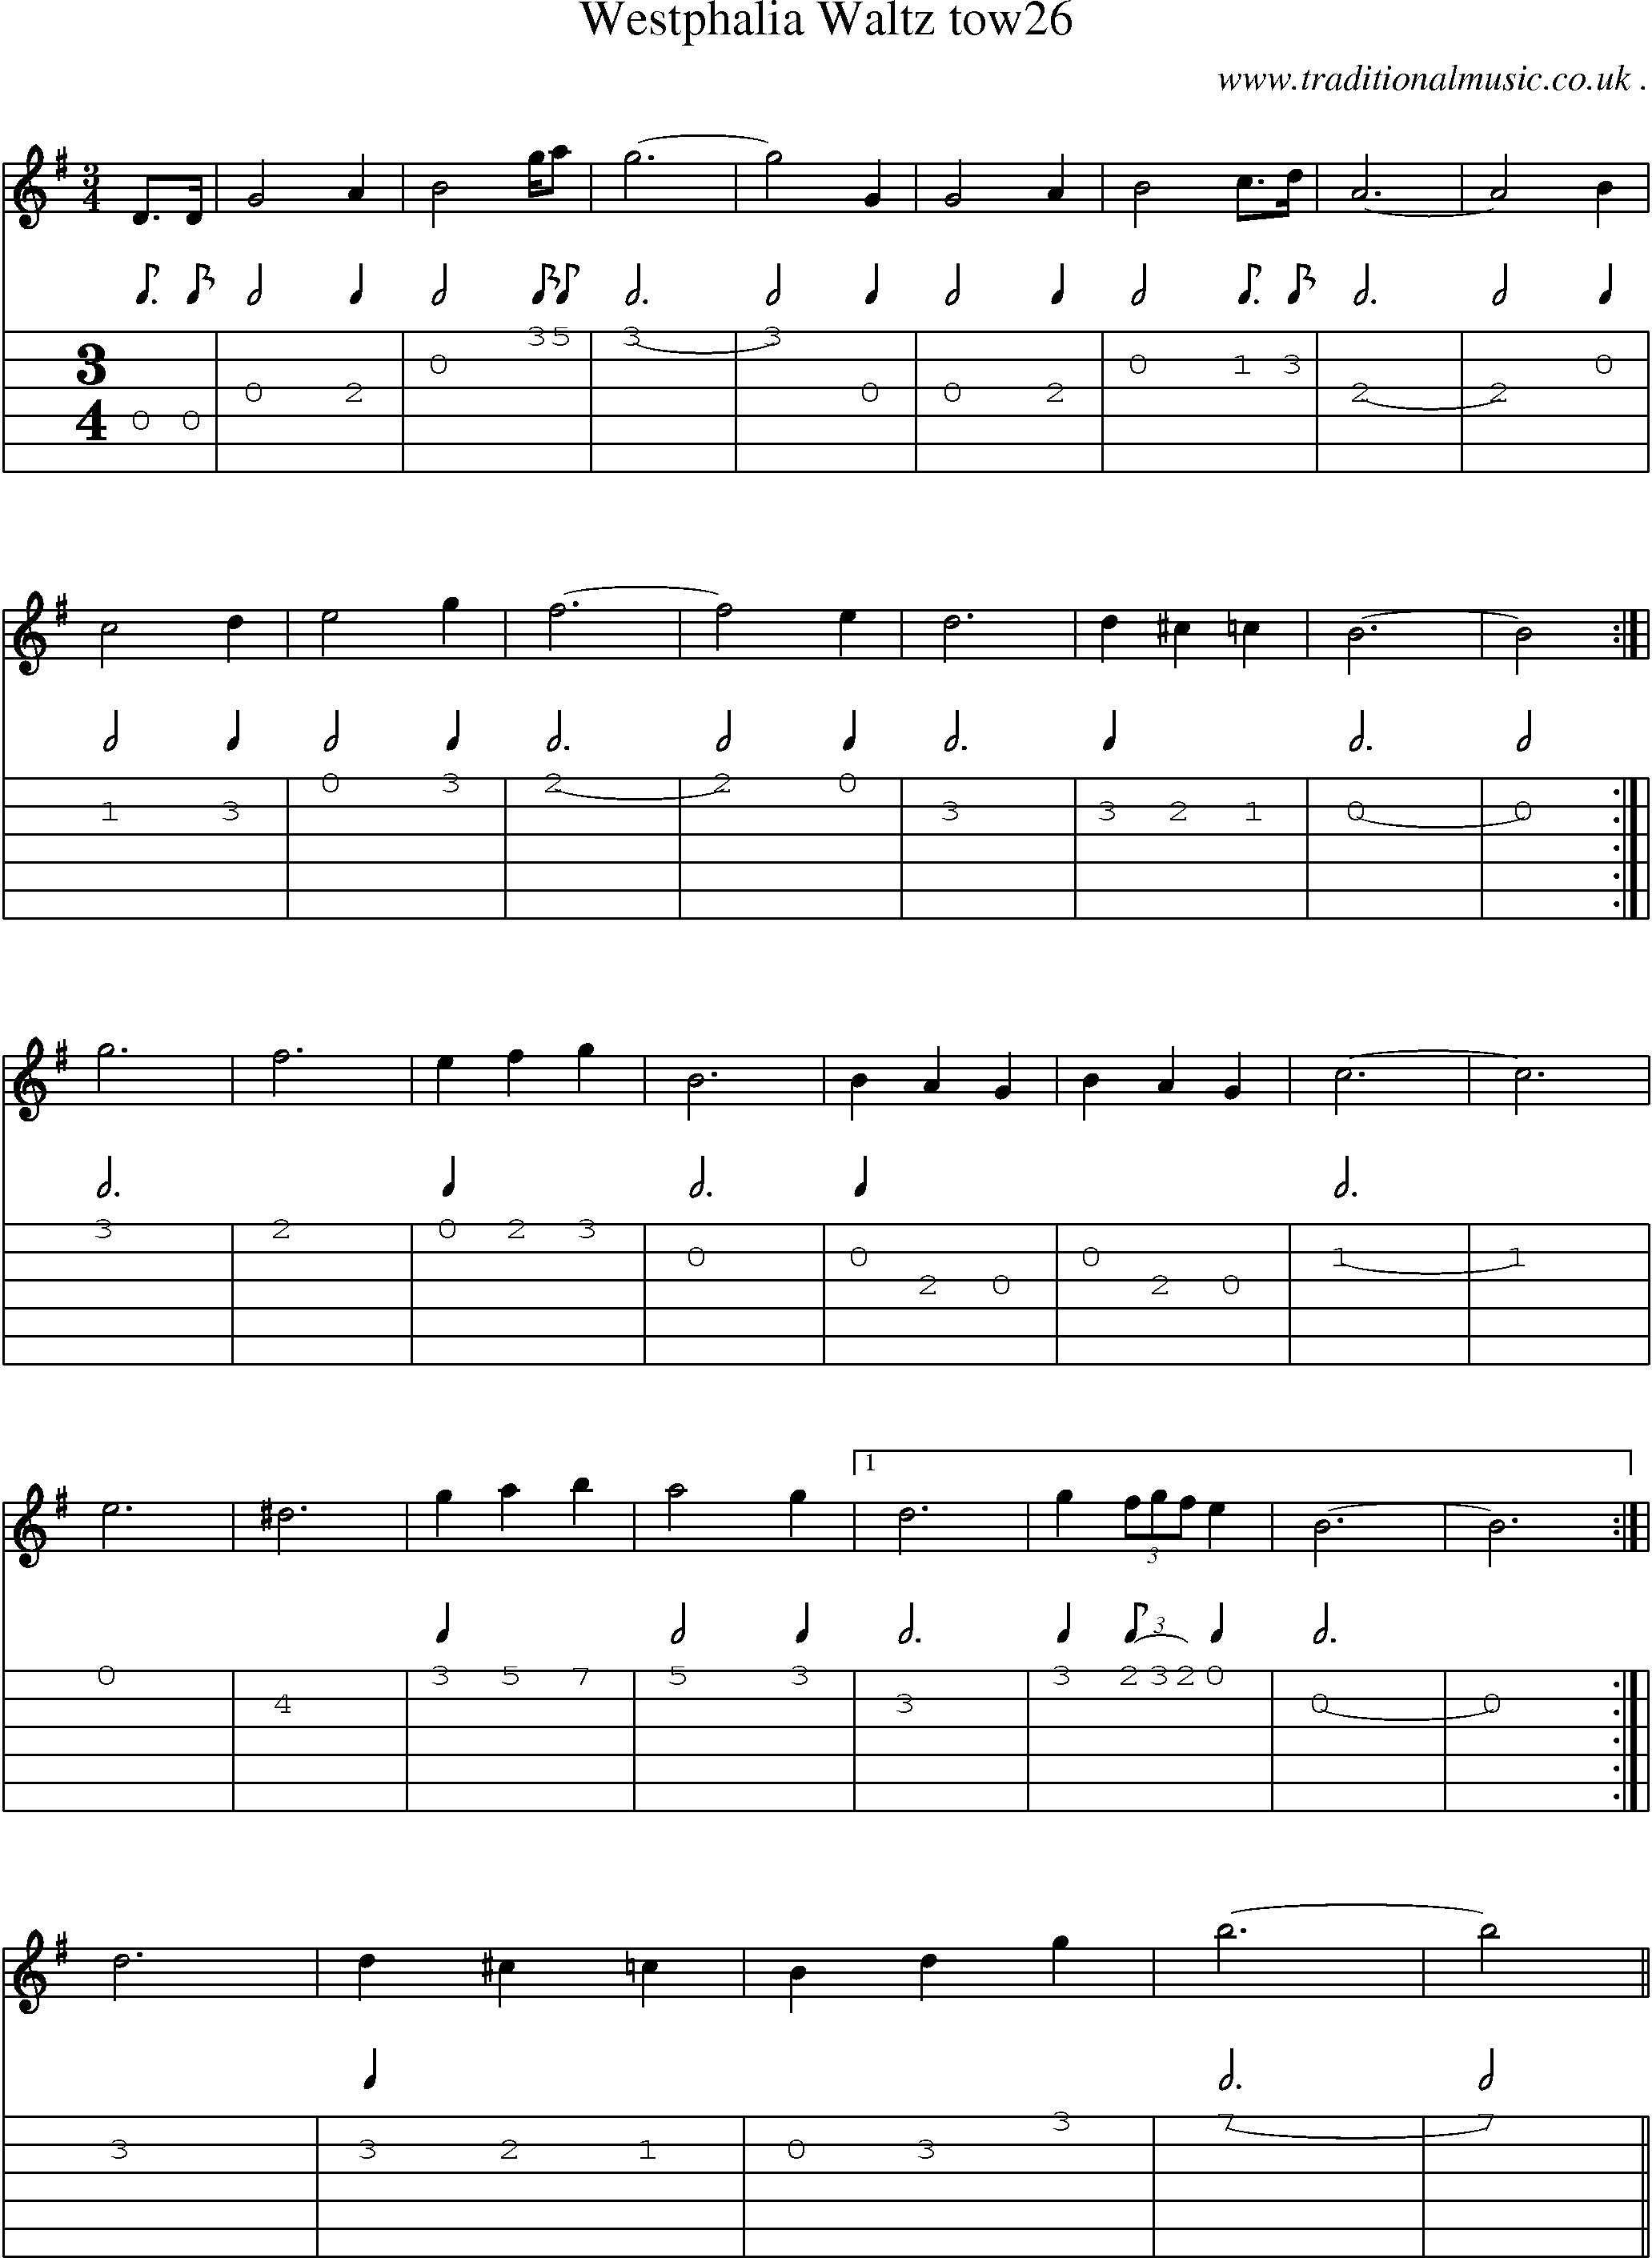 Music Score and Guitar Tabs for Westphalia Waltz Tow26